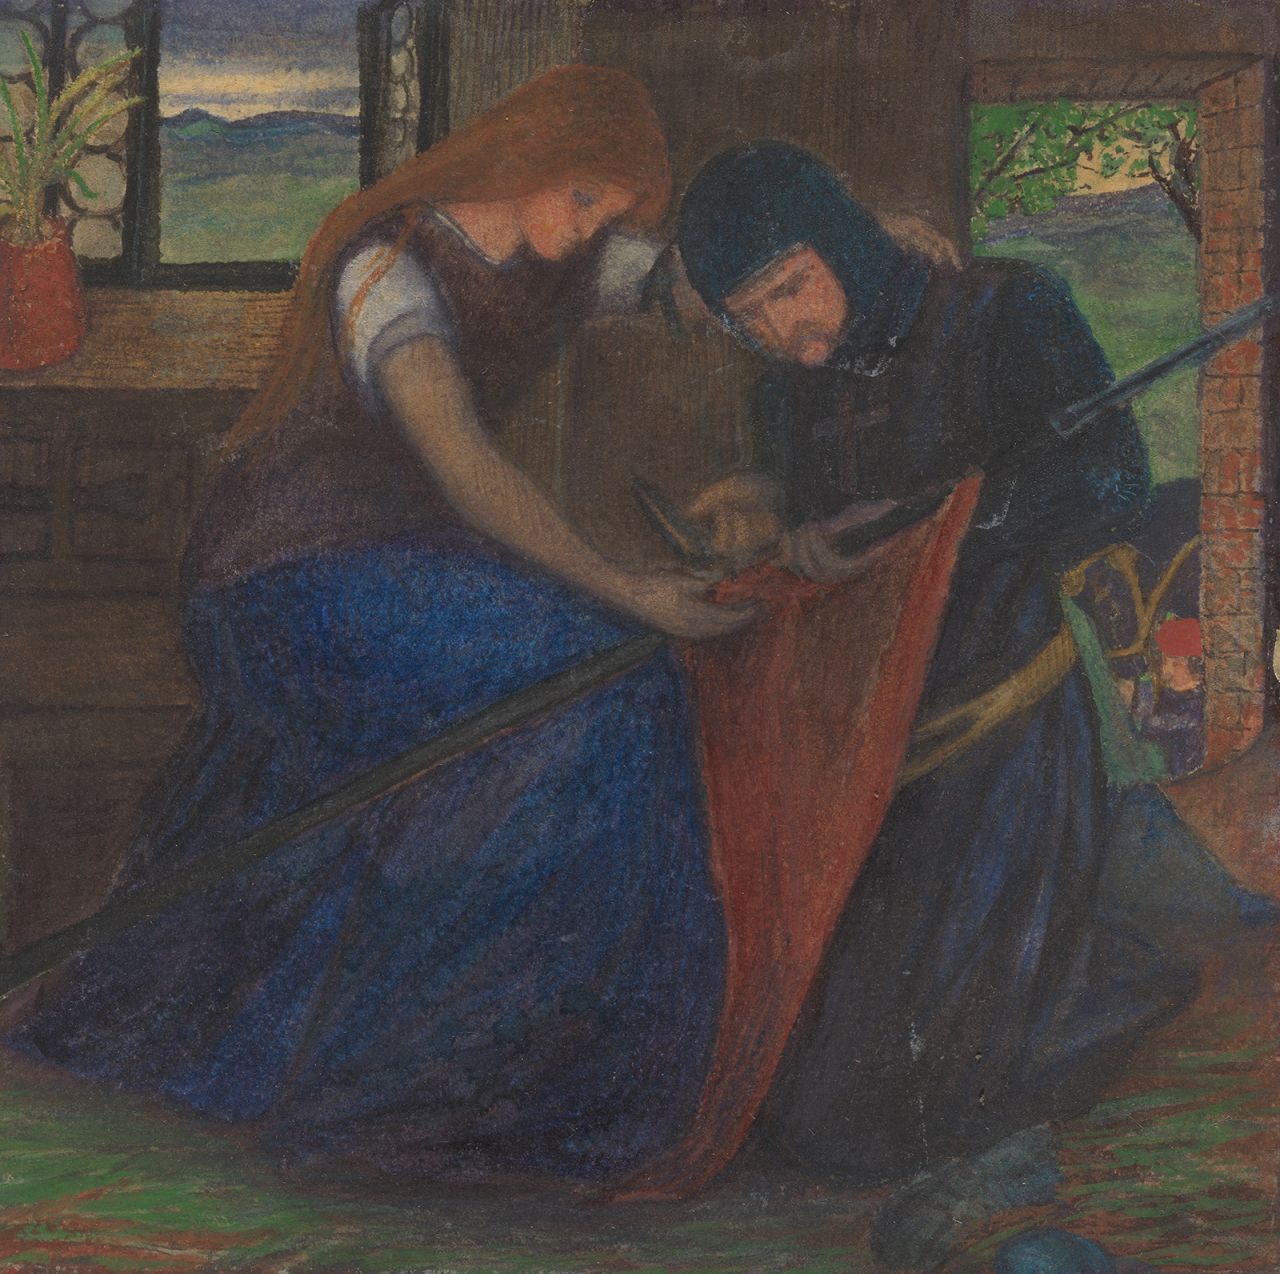 Elizabeth Siddal is often called a 'supermodel' of the Pre-Raphaelite movement. But she was an artist who exhibited with the group as well.